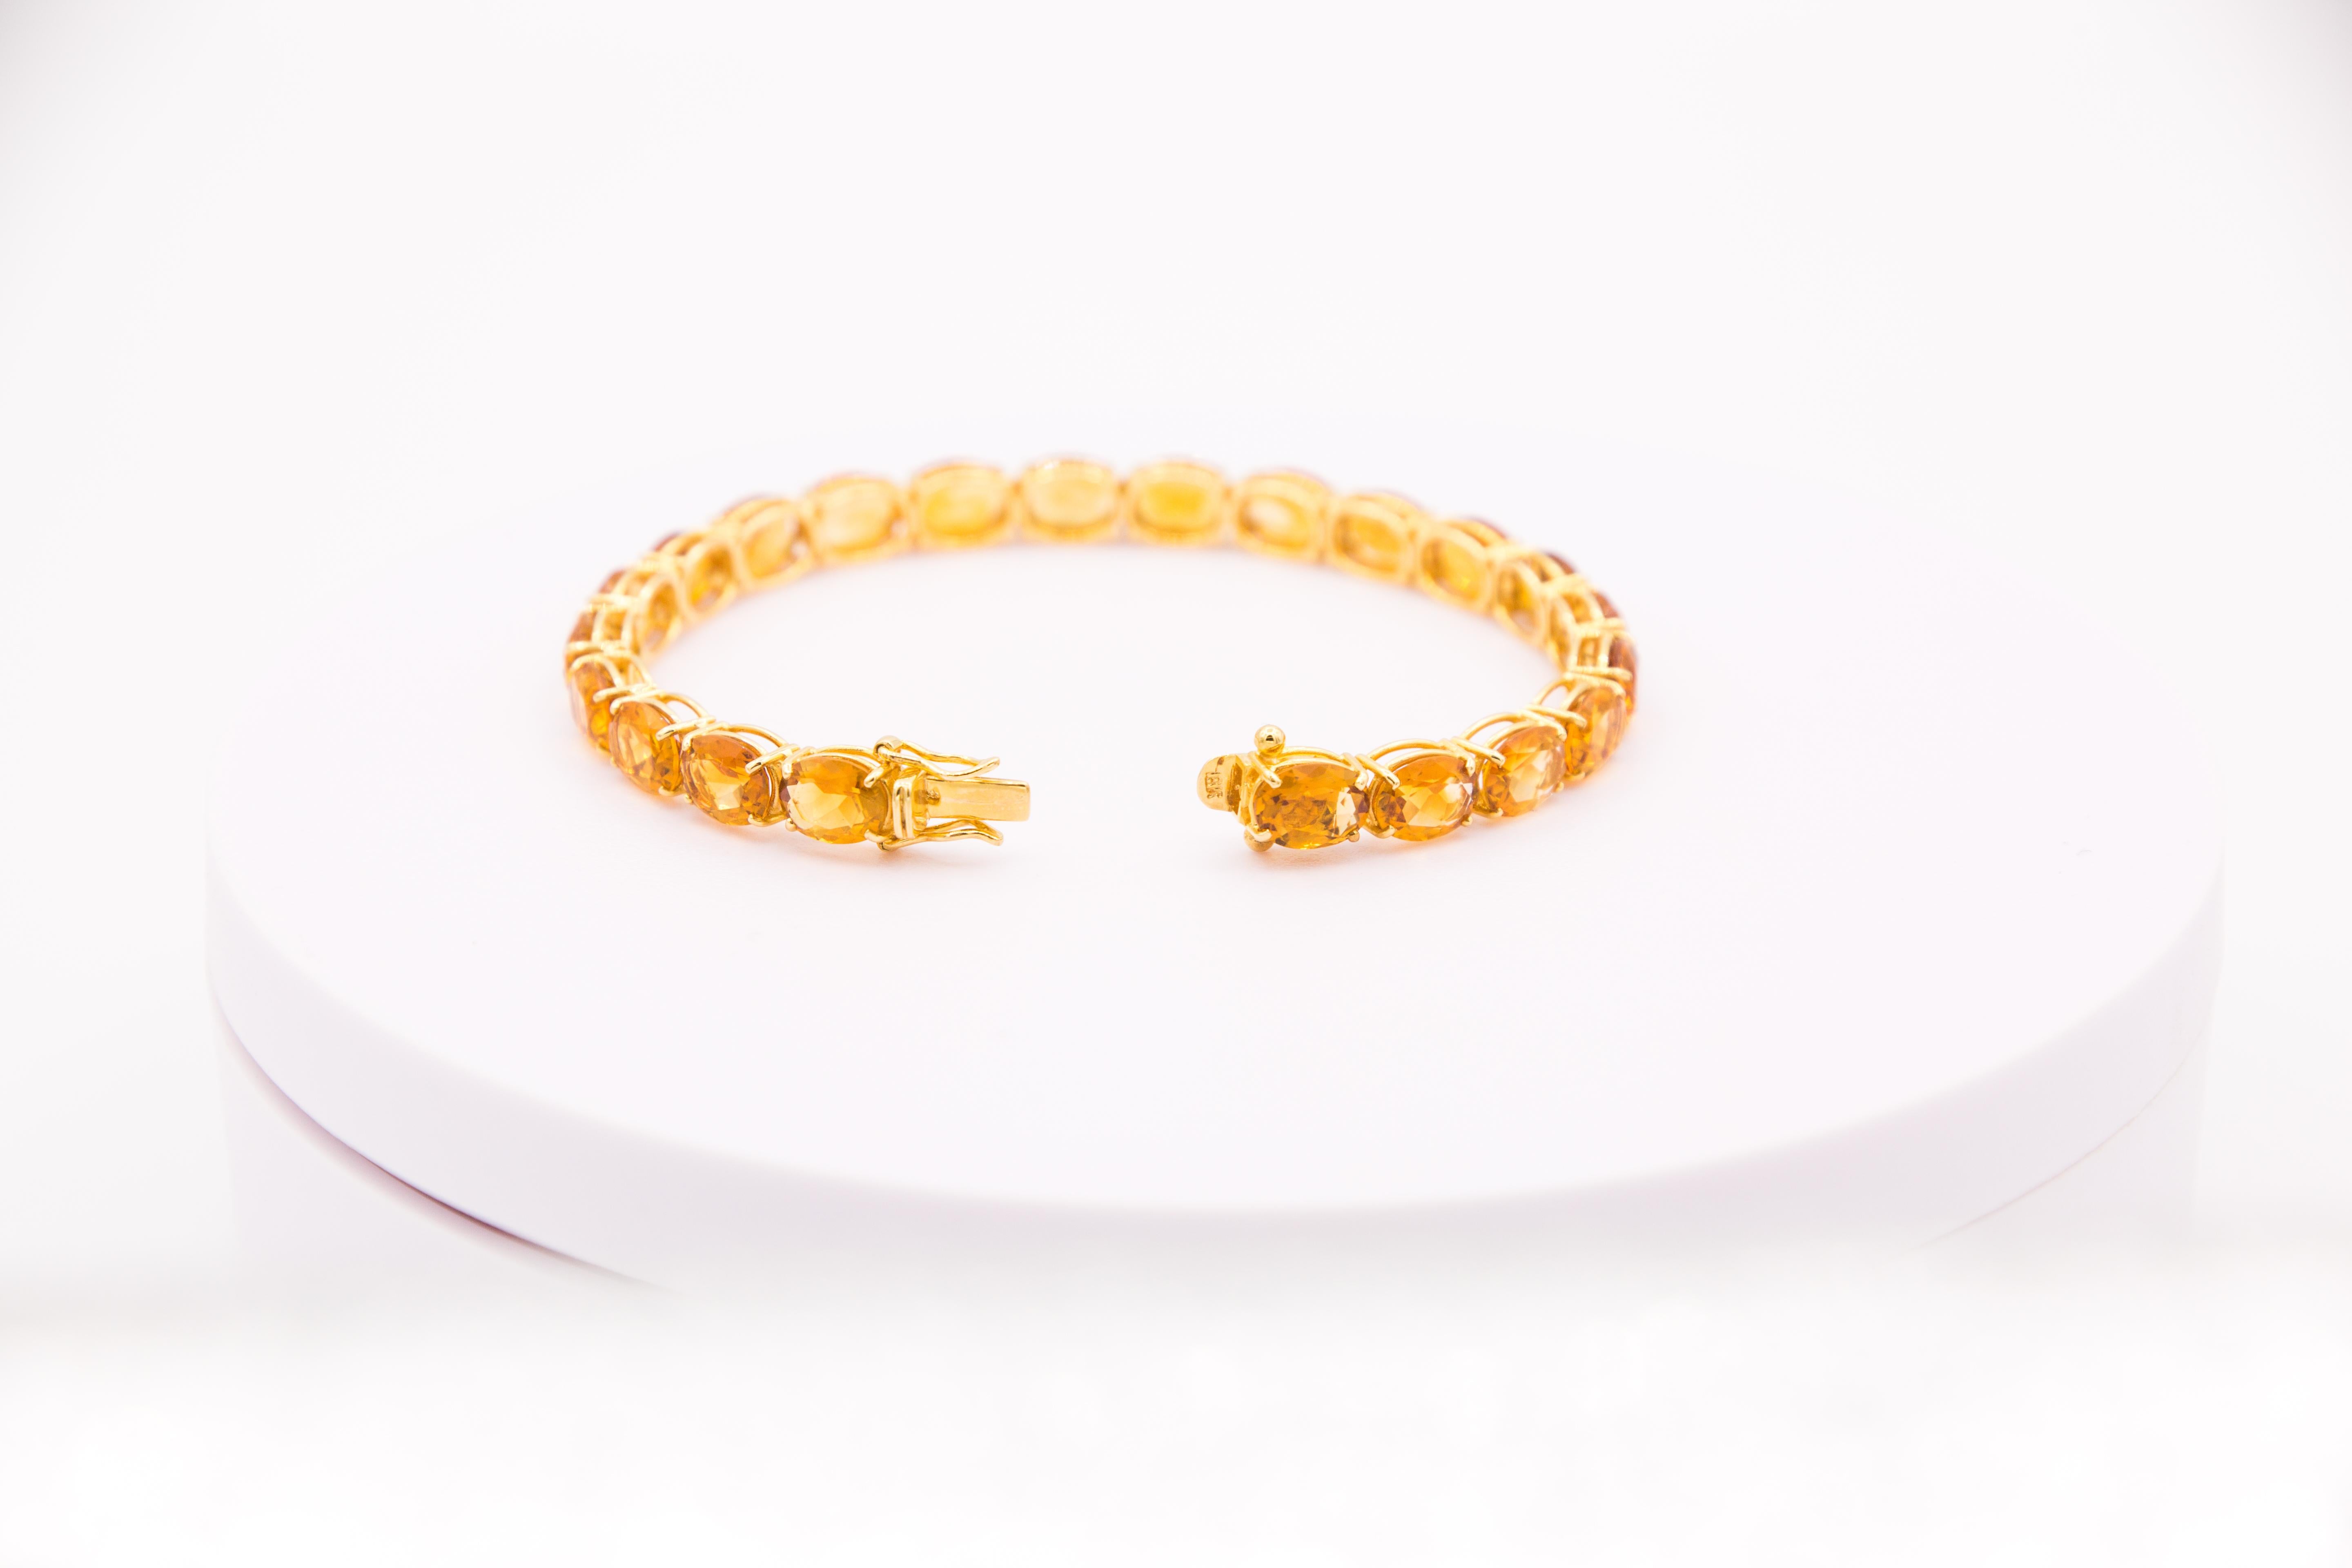 18 k yellow gold
24,24 ct citrin beautiful color
18 cm long
5 mm wide
16,8 gram

this bracelet you not find very often, one stone like the other and you can carry every day